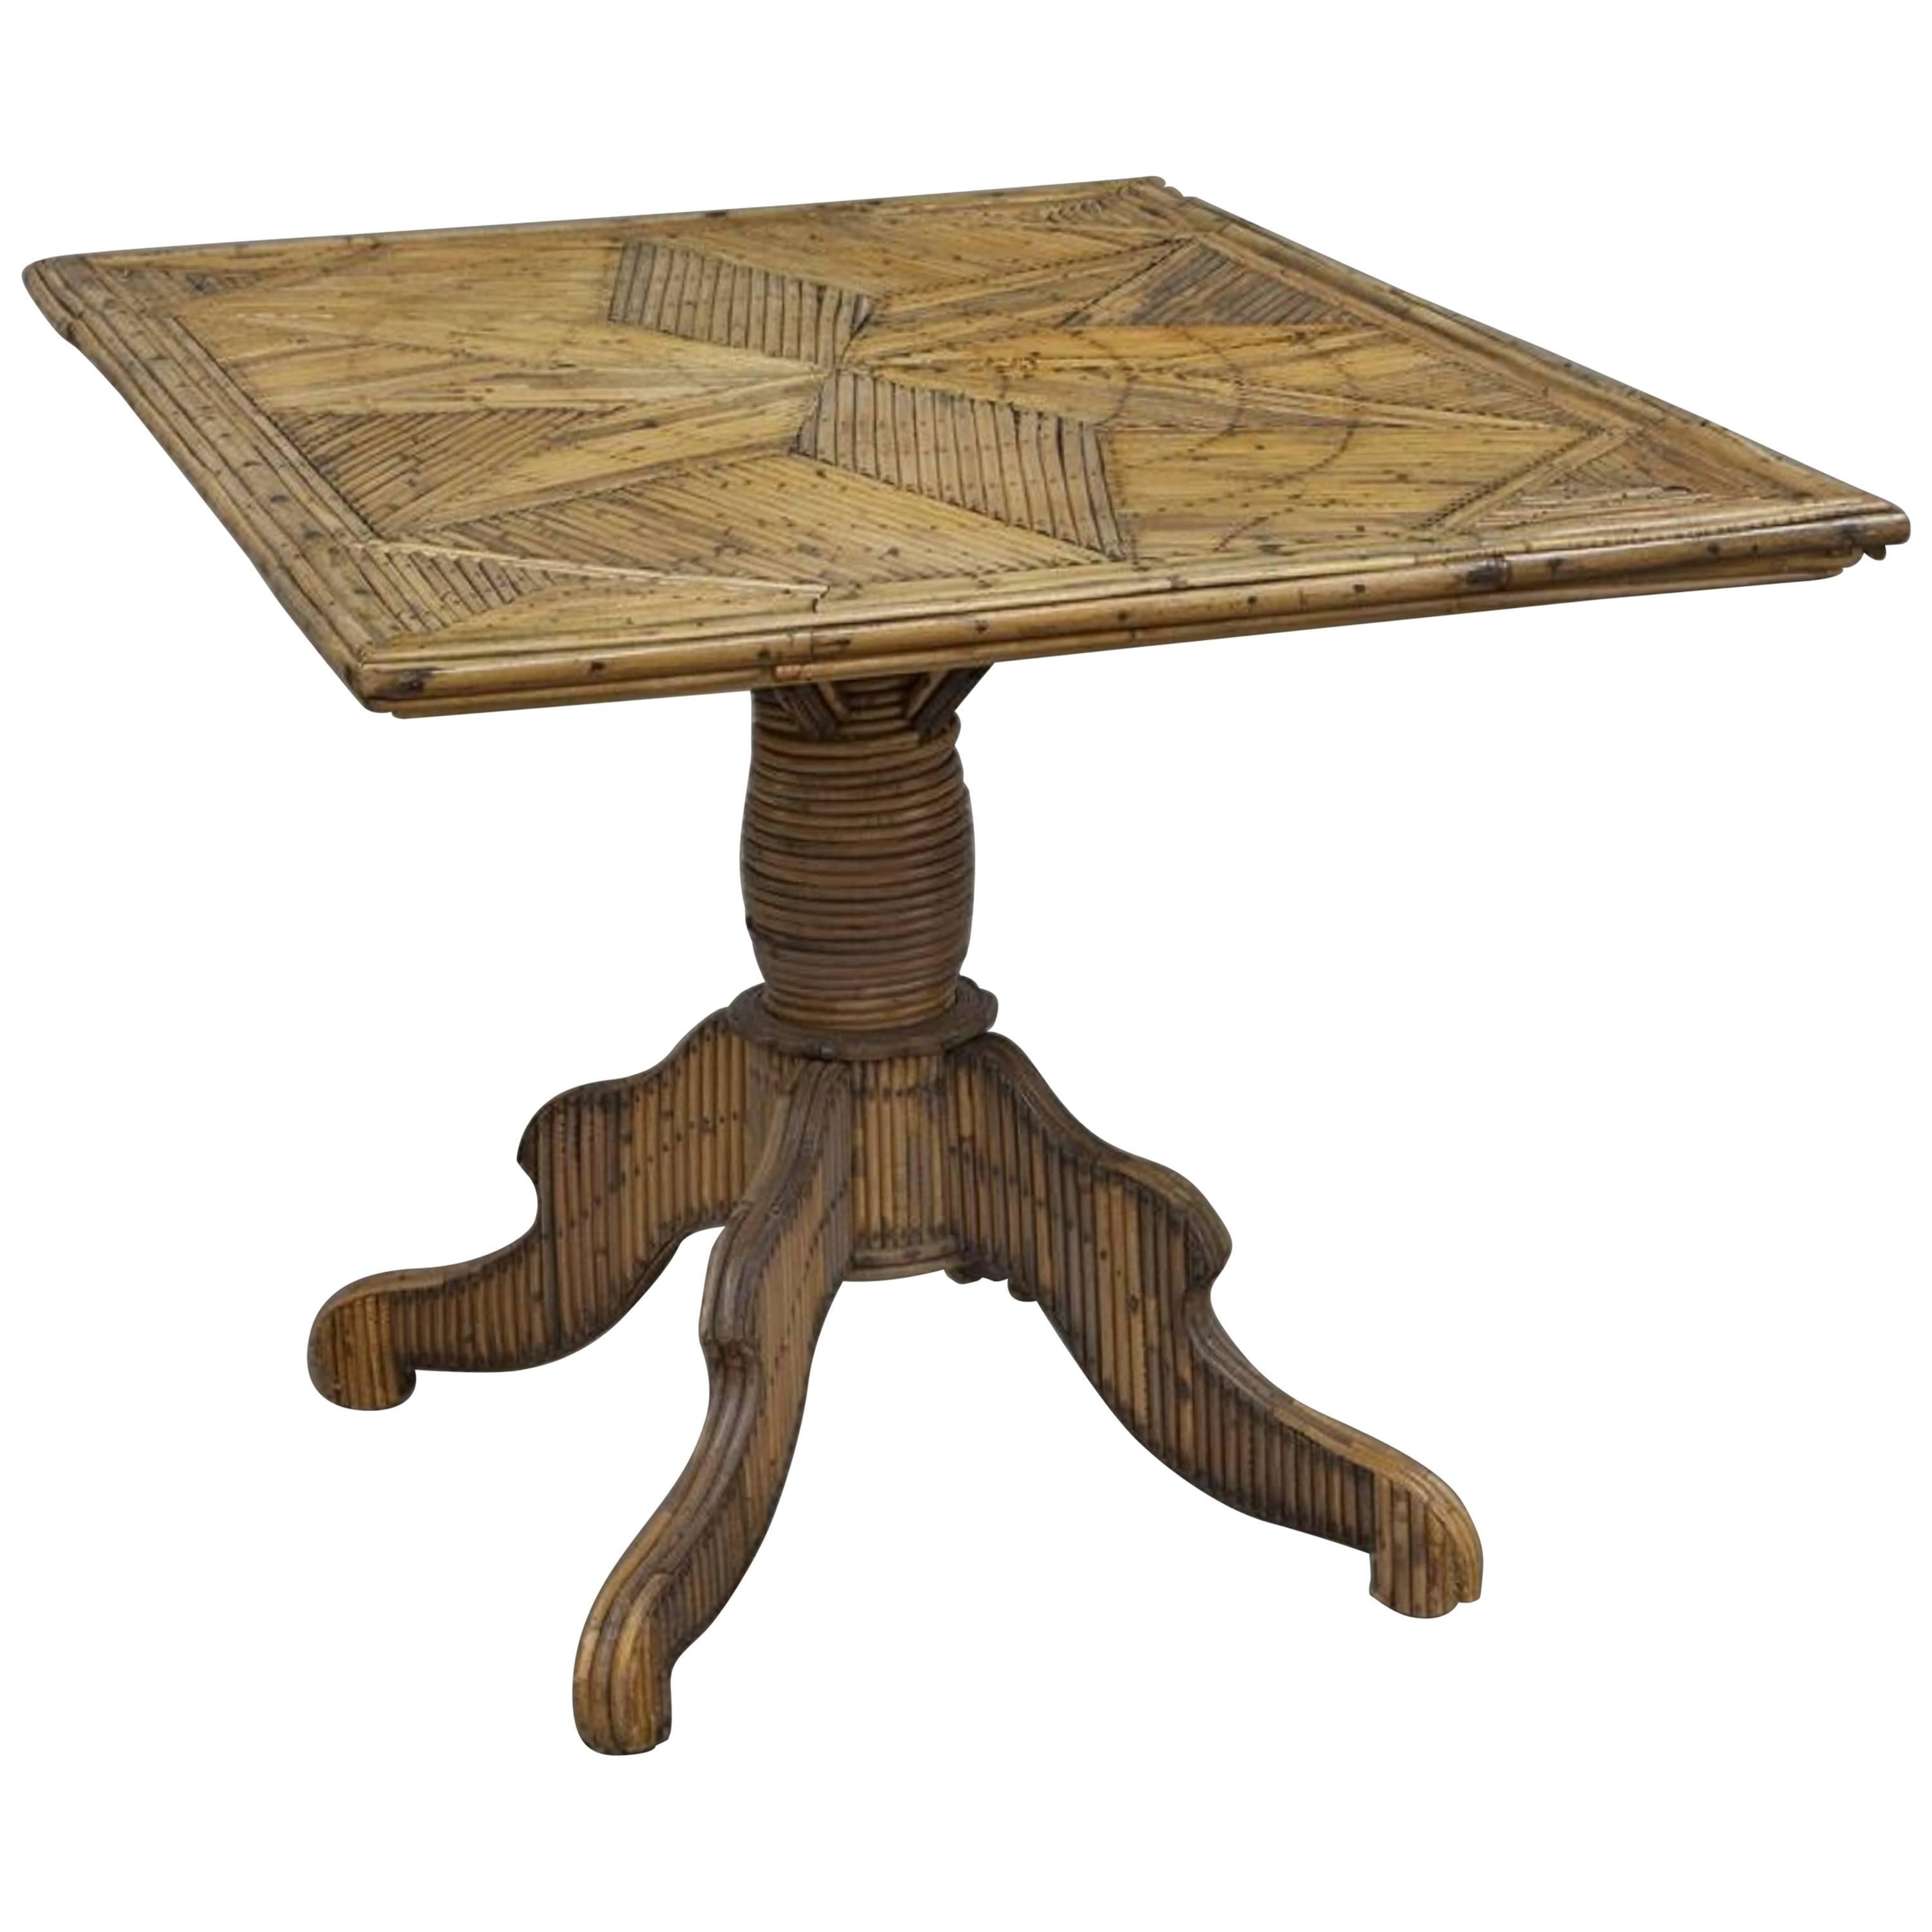 Unique Rustic Style Centre Table Composed of Reeds For Sale